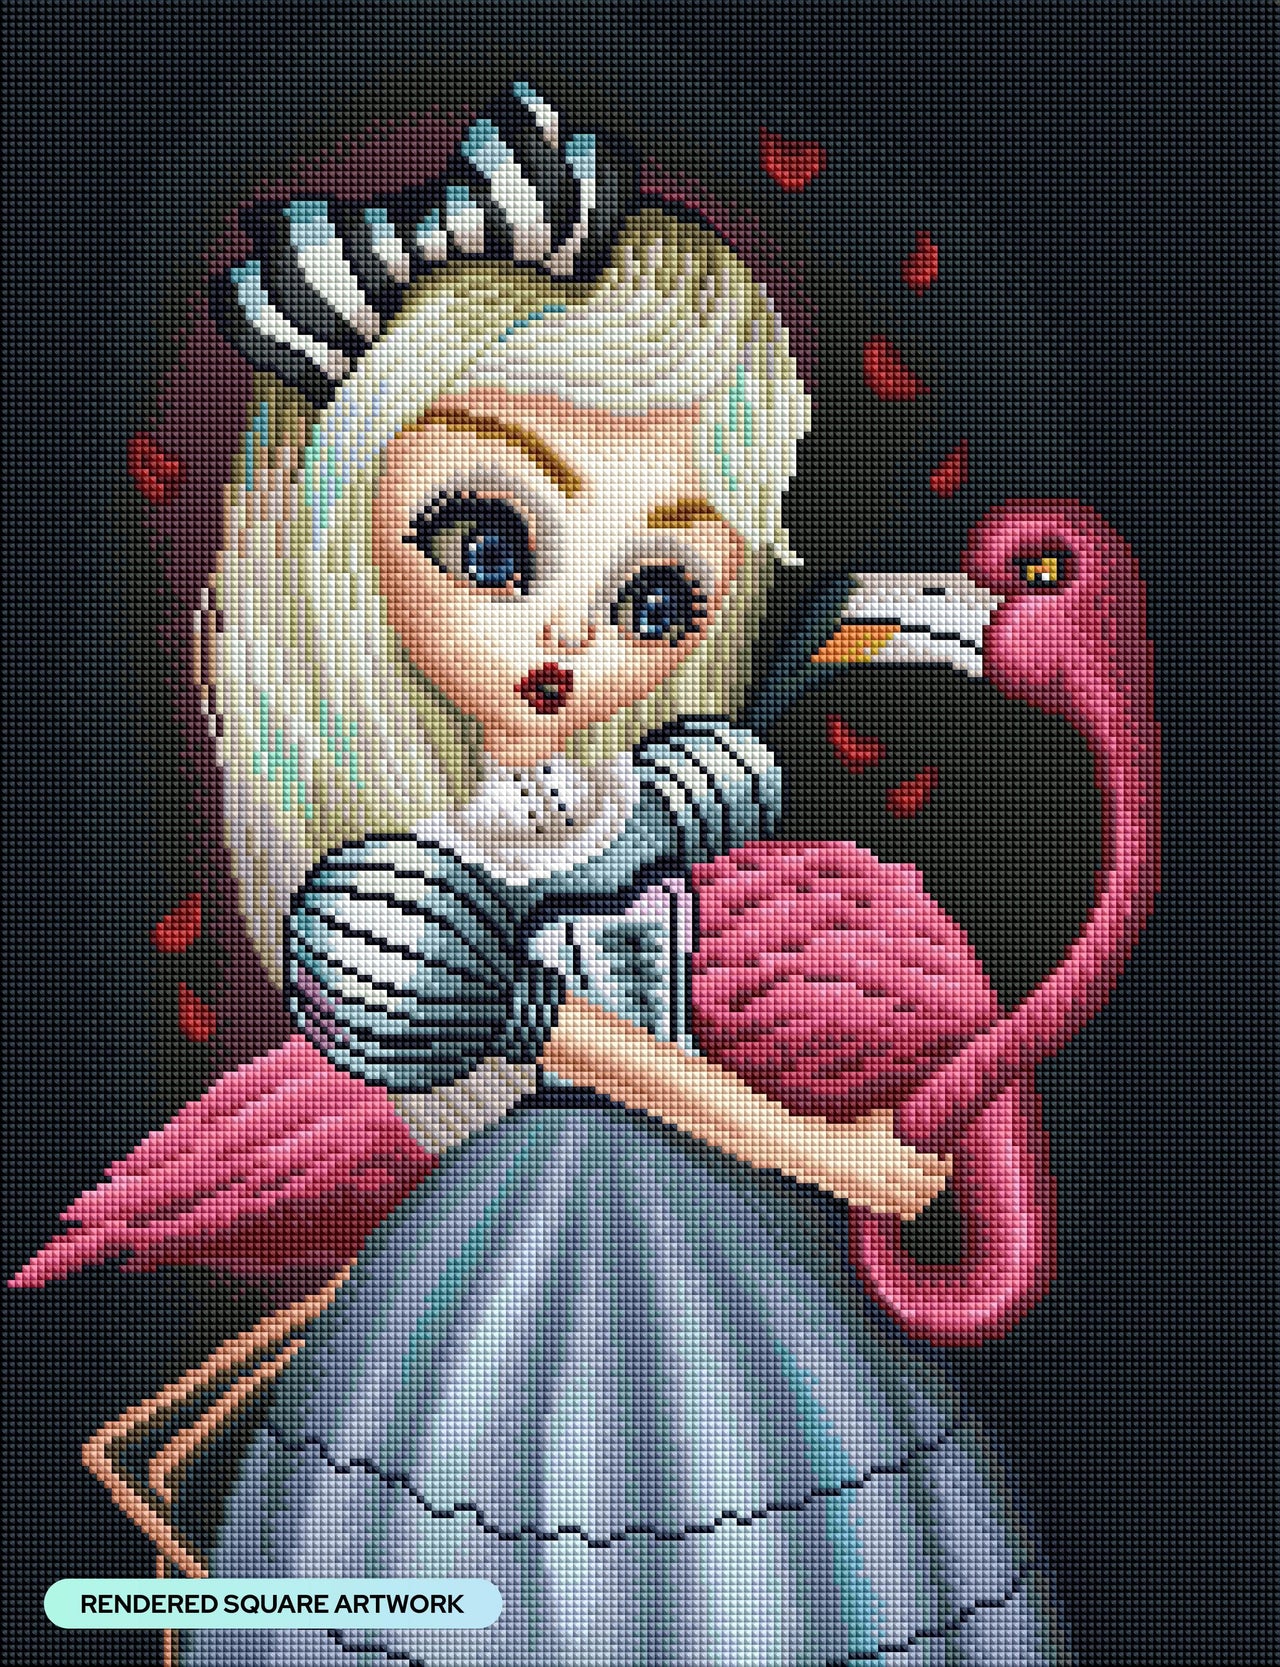 Diamond Painting Alice and the Flamingo 17" x 22" (42.8cm x 55.8cm) / Square with 57 Colors including 2 ABs and 1 Fariy Dust Diamonds / 38,528